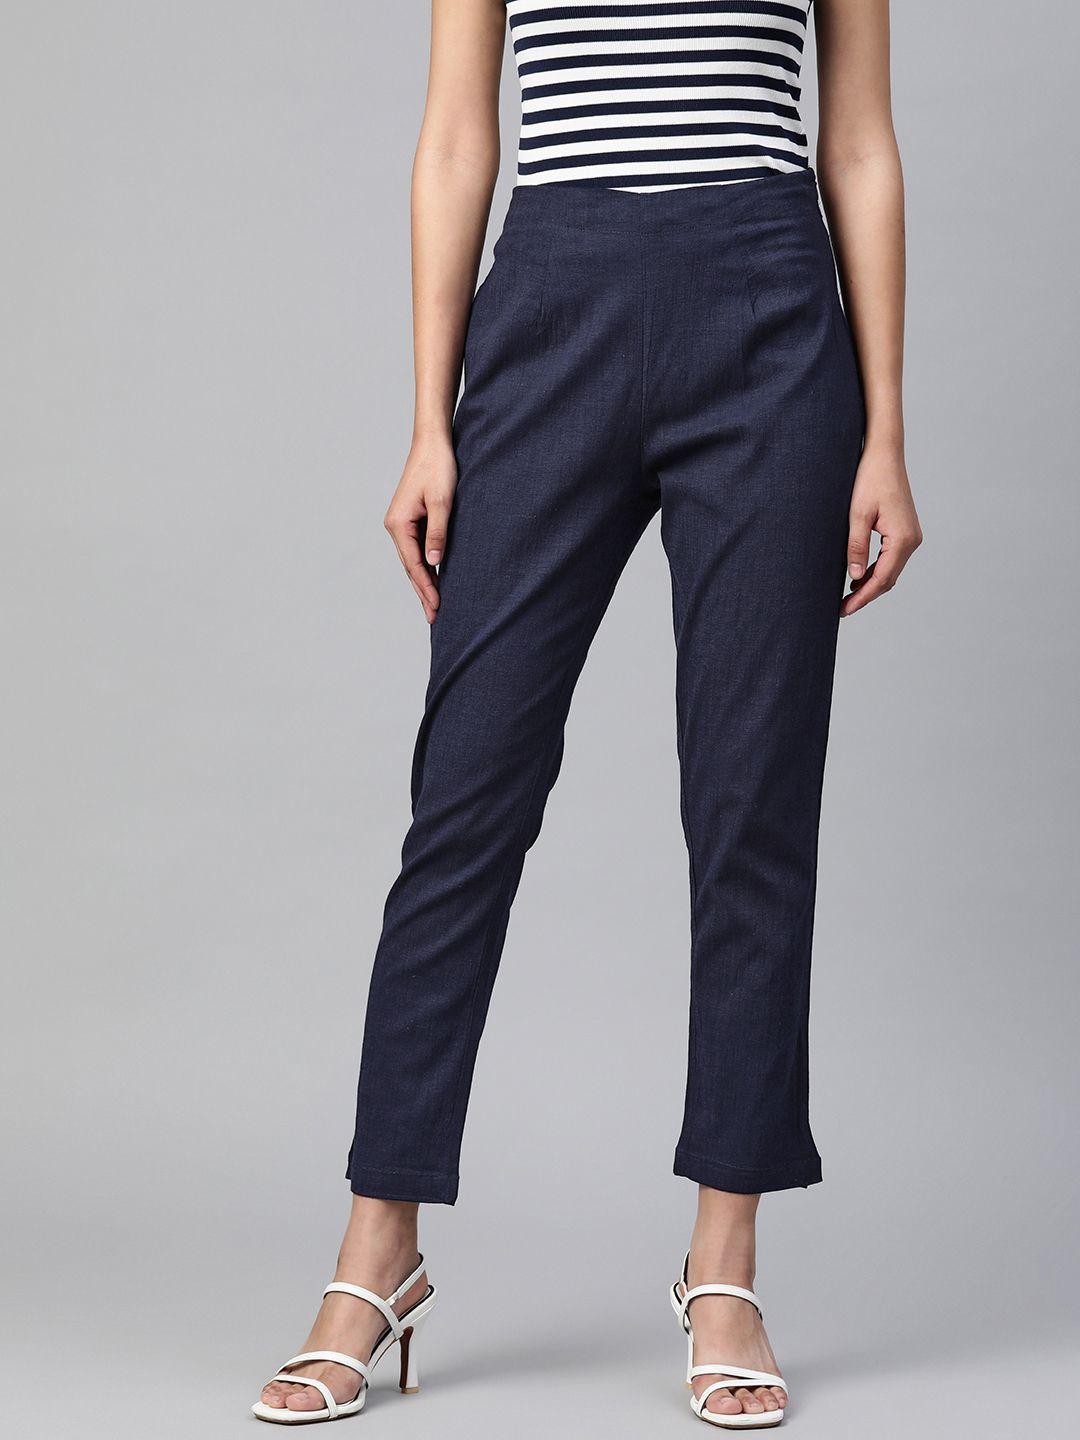 readiprint fashions women navy blue easy wash cropped regular trousers